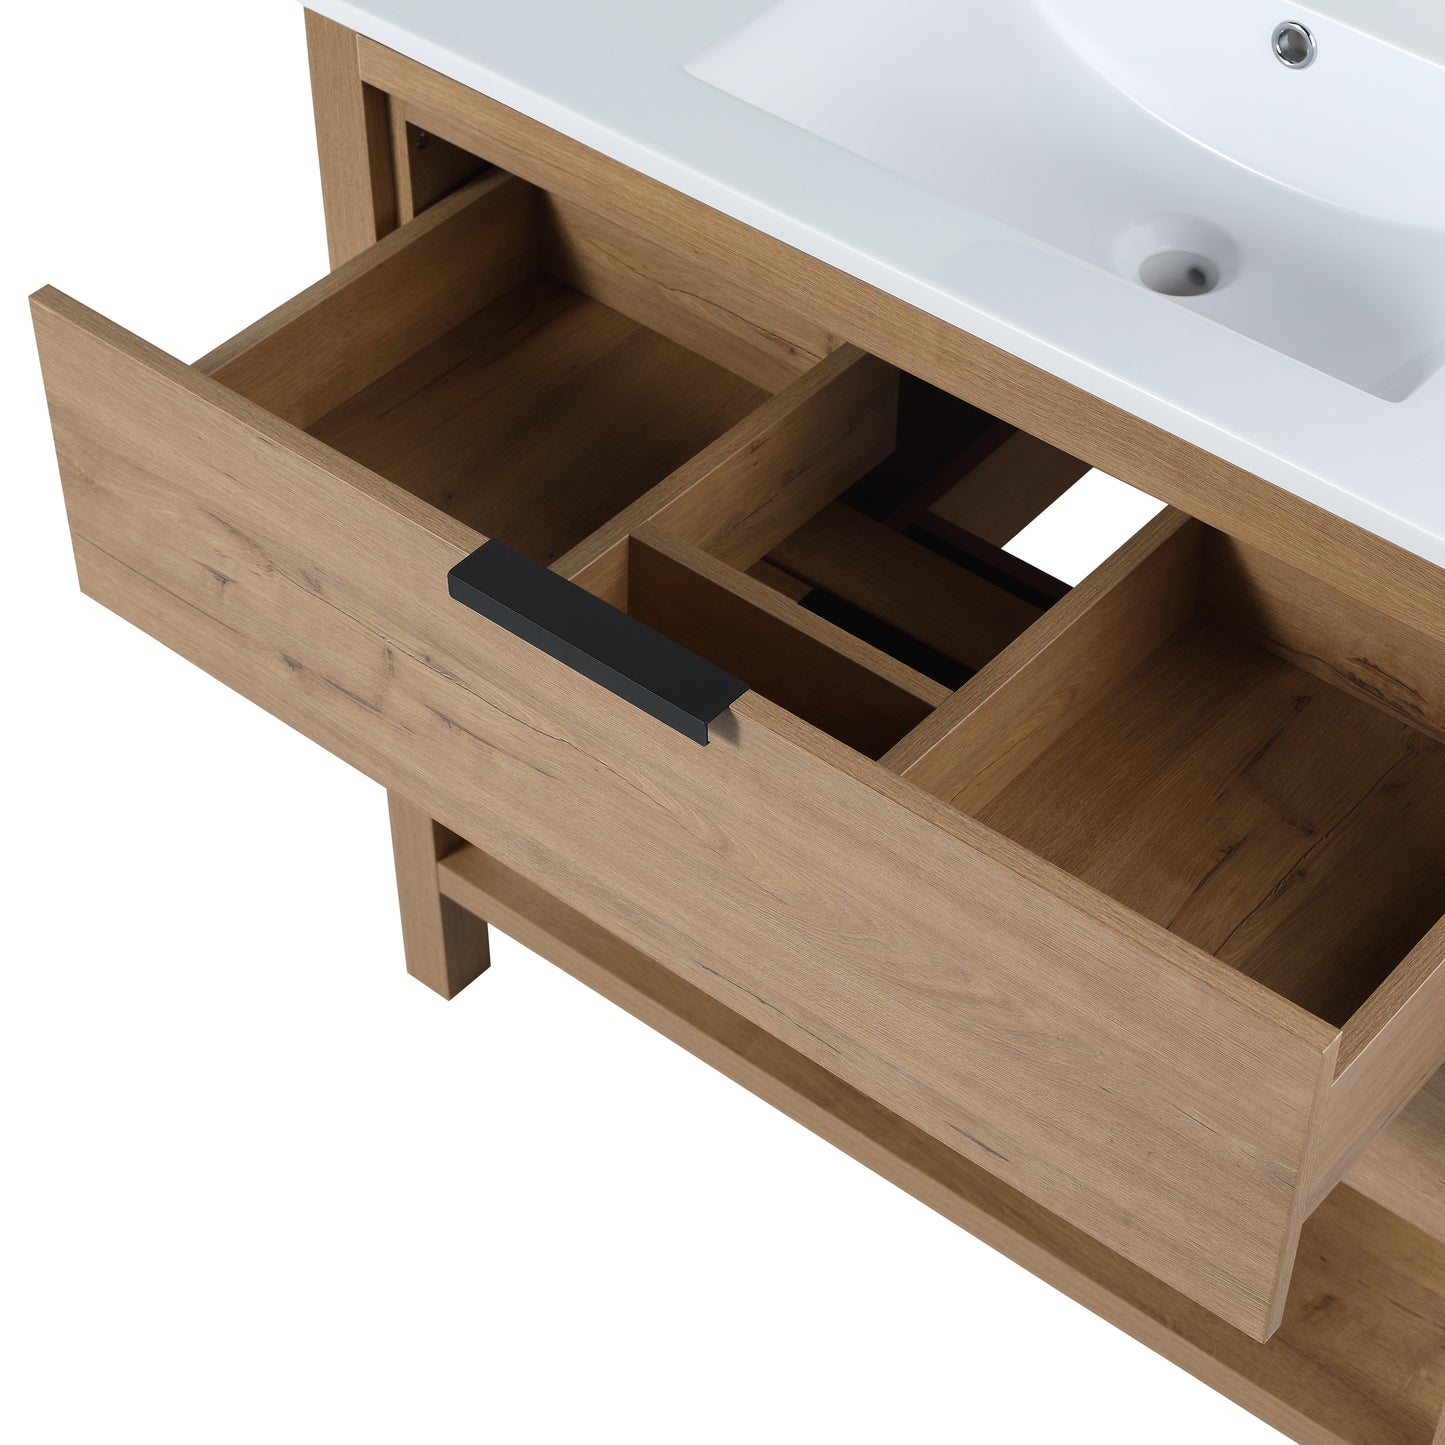 Freestanding bathroom vanity with drawers,36 inch with ceramic basin,36x18